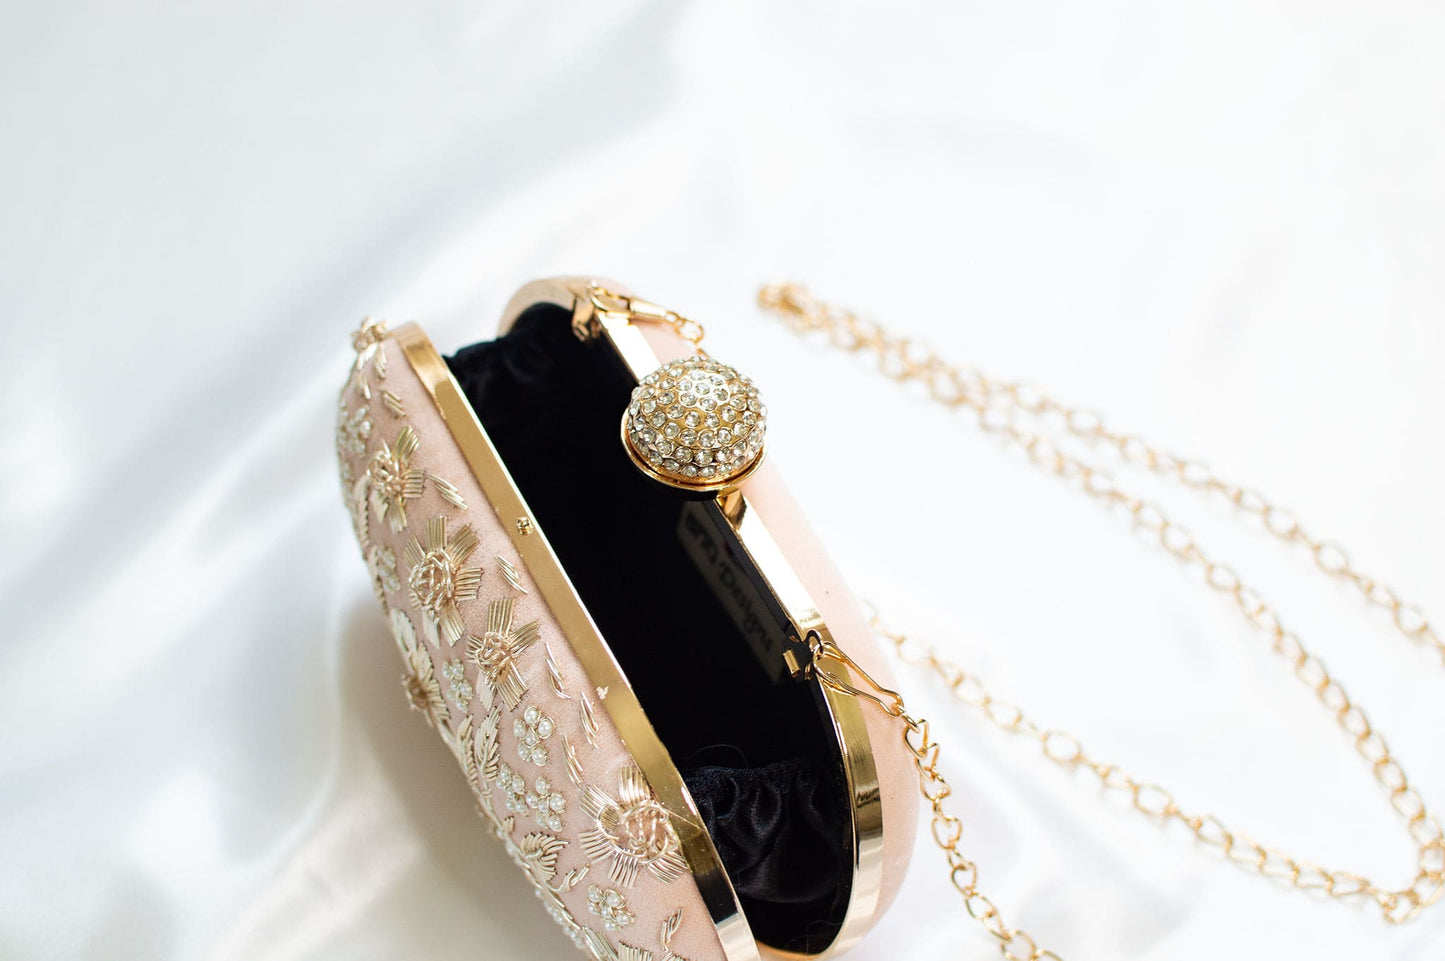 Peach clutch purse with stone studded closure & gold strap chains